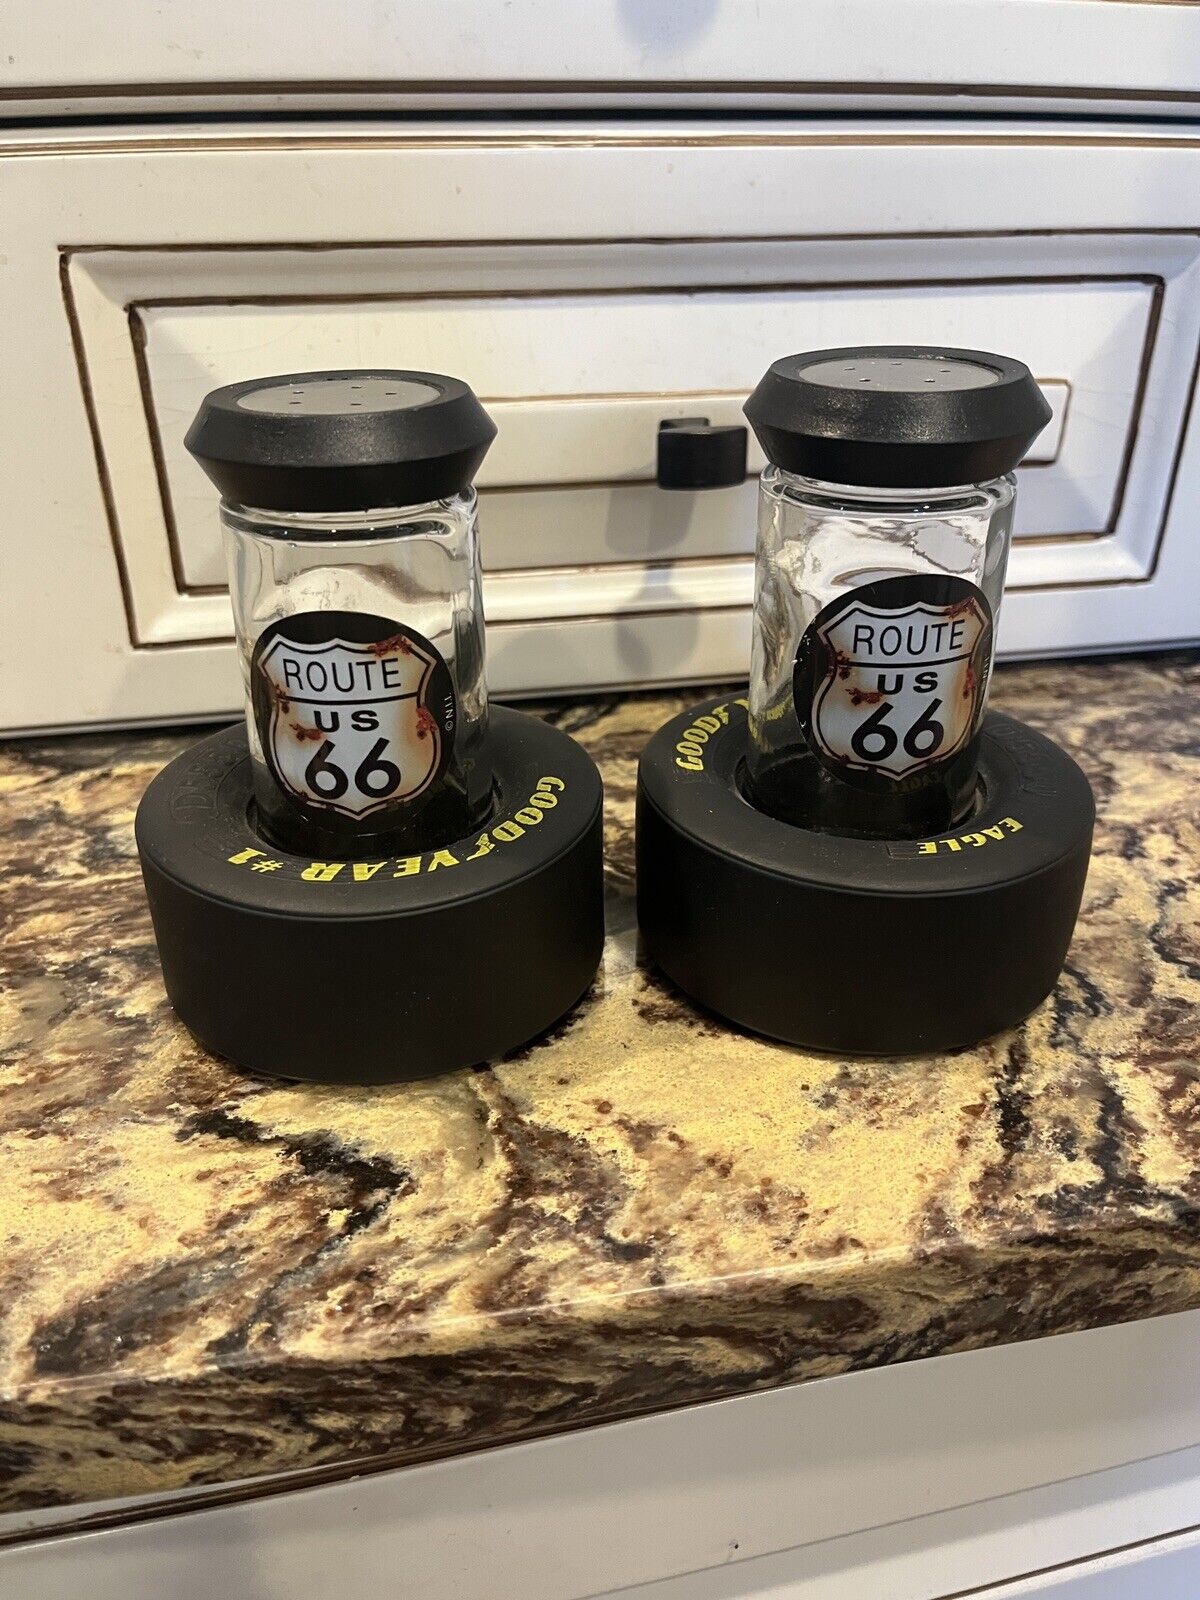 ROUTE 66 GOODYEAR TIRE GLASS SALT AND PEPPER SHAKERS